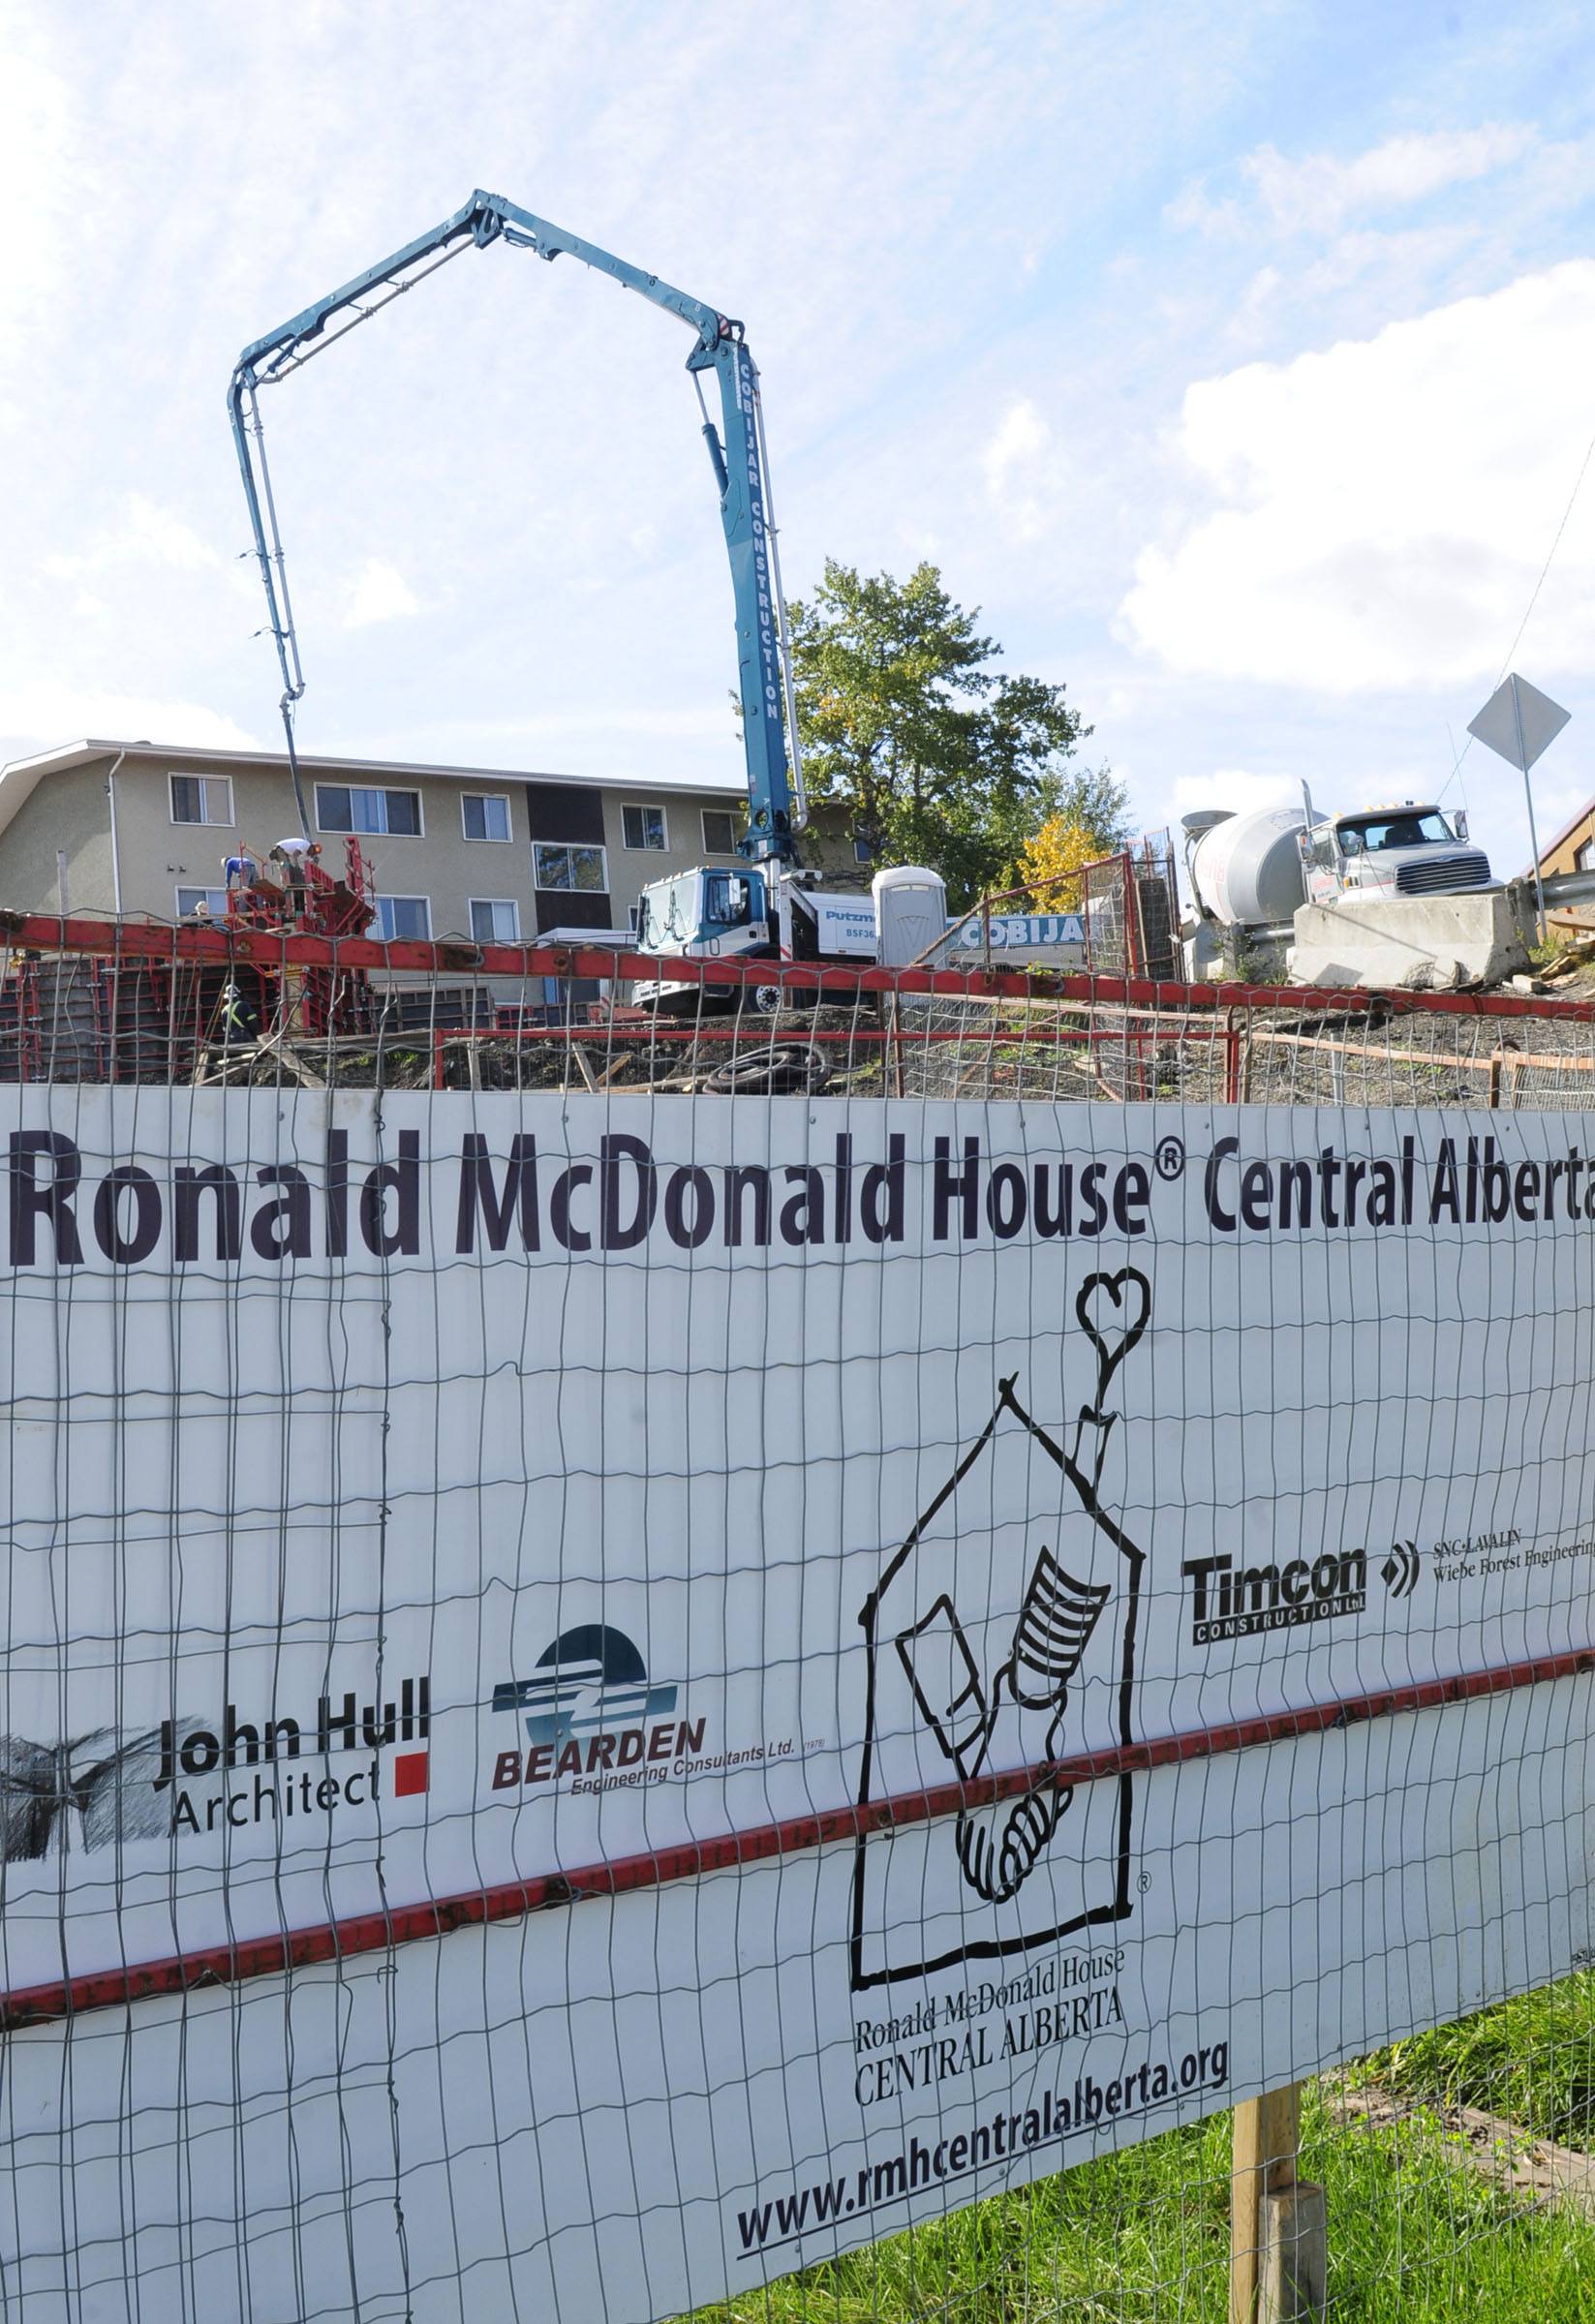 Construction is underway for the new Ronald McDonald House in Red Deer. The house will provide close accommodations for parents with children undergoing treatment at the hospital.